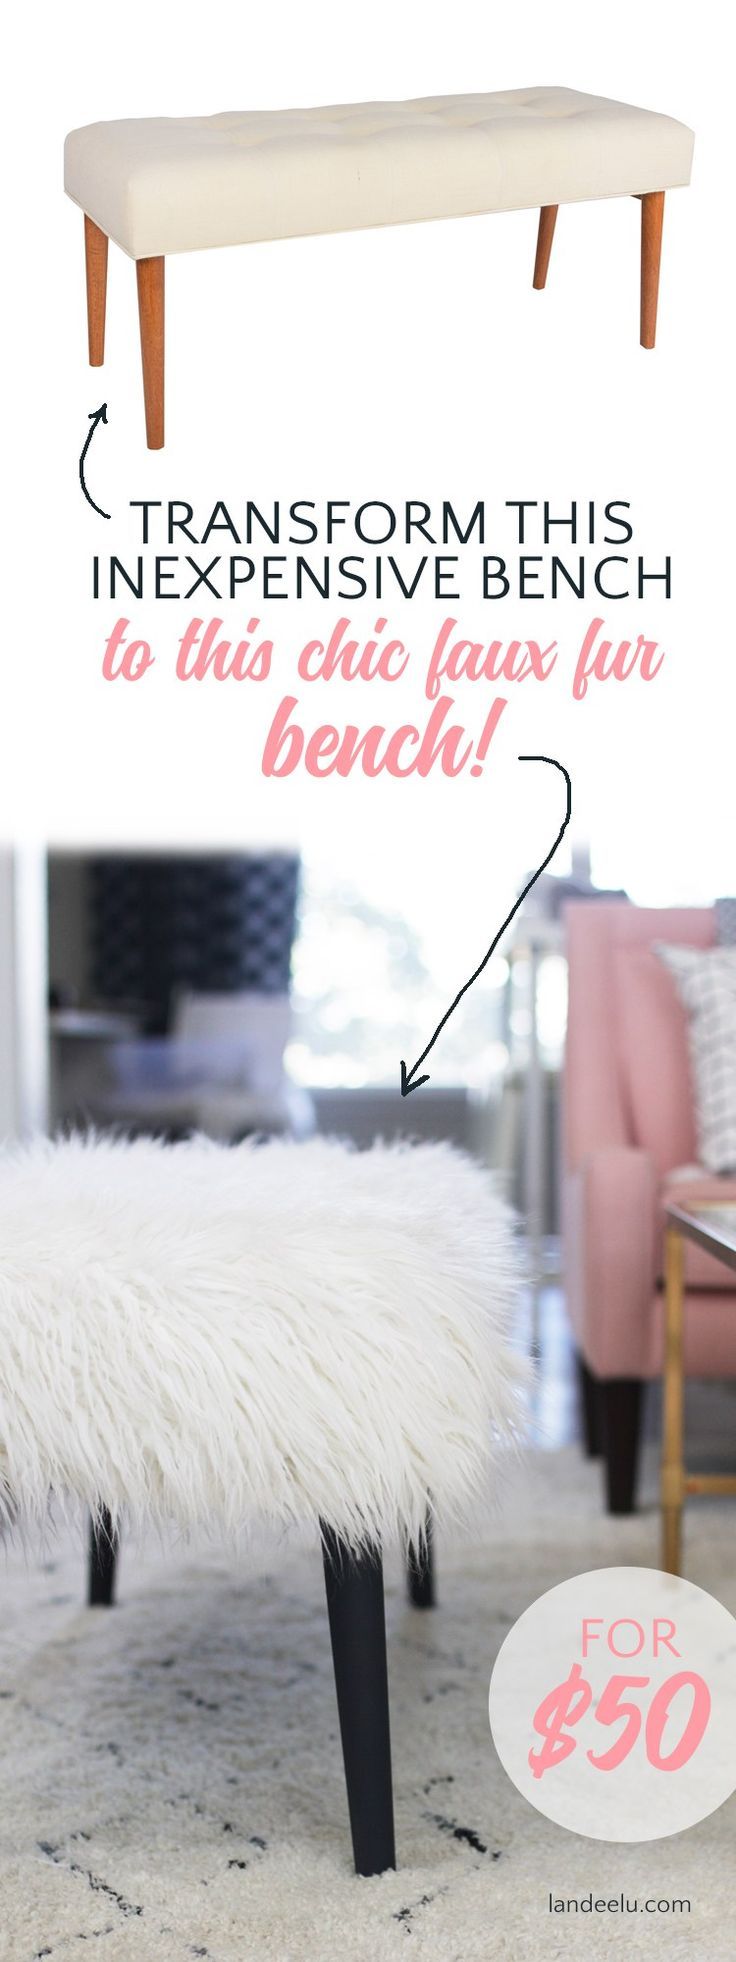 Easily transform an inexpensive upholstered bench into a chic faux fur bench wit...